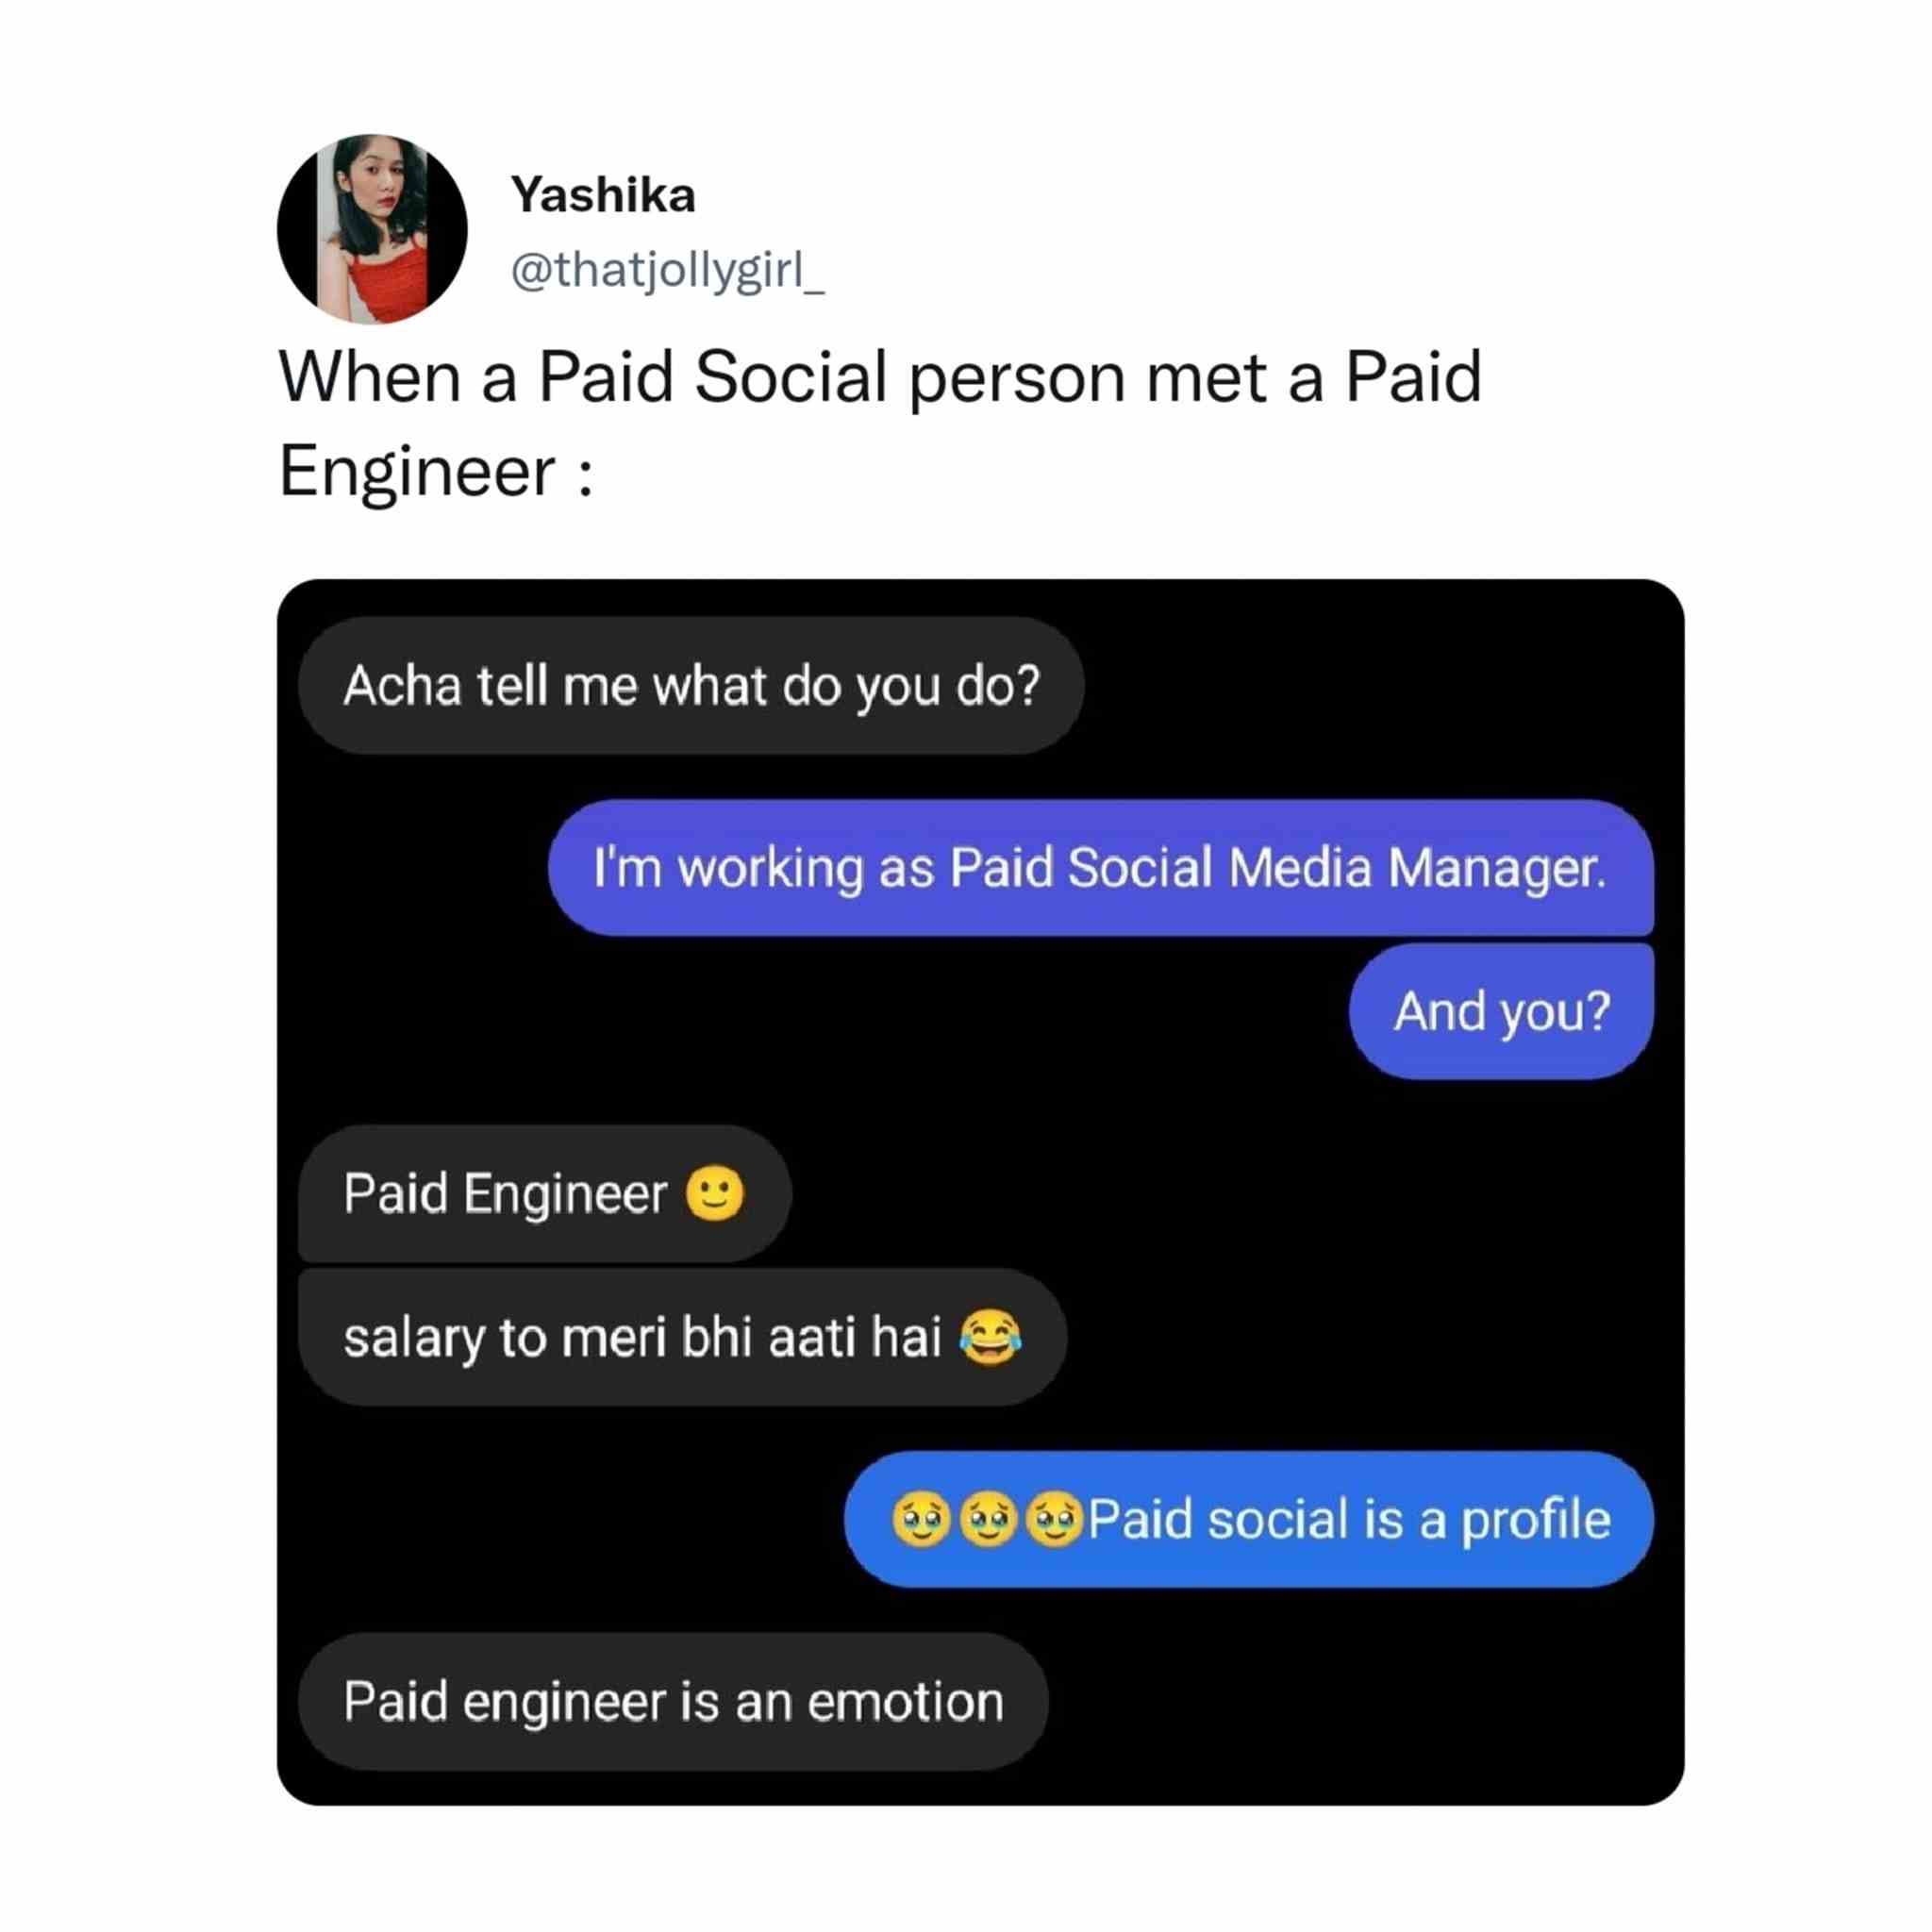 When a paid Social person met a Paid Engineer